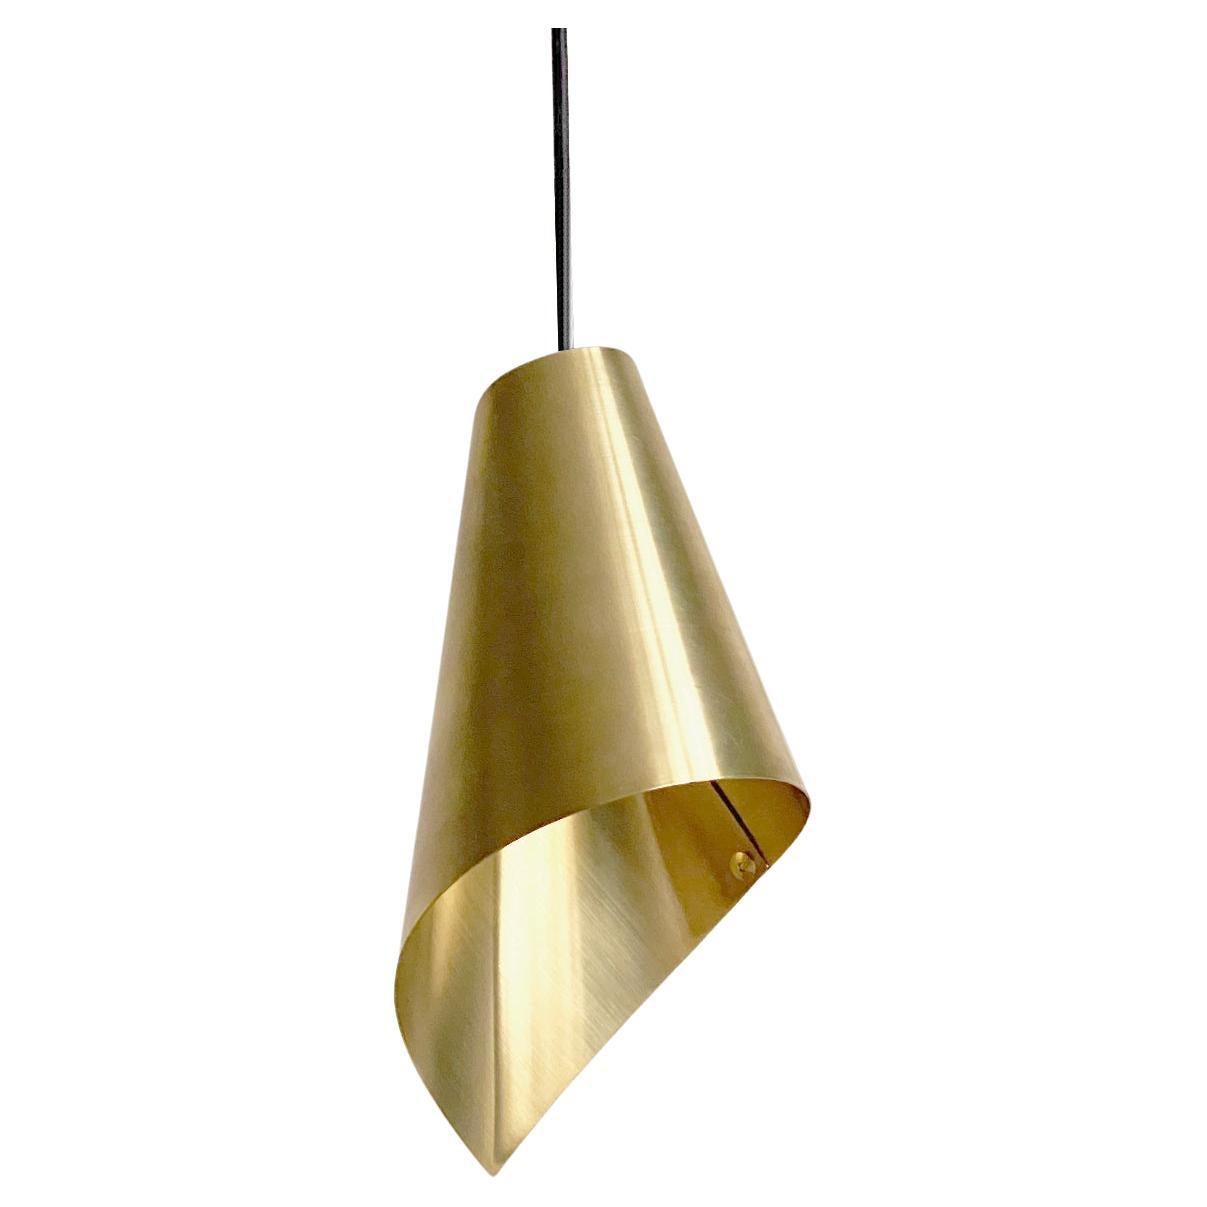 ARC MAXI Asymmetric Pendant Light in Brushed Brass Made in the UK For Sale